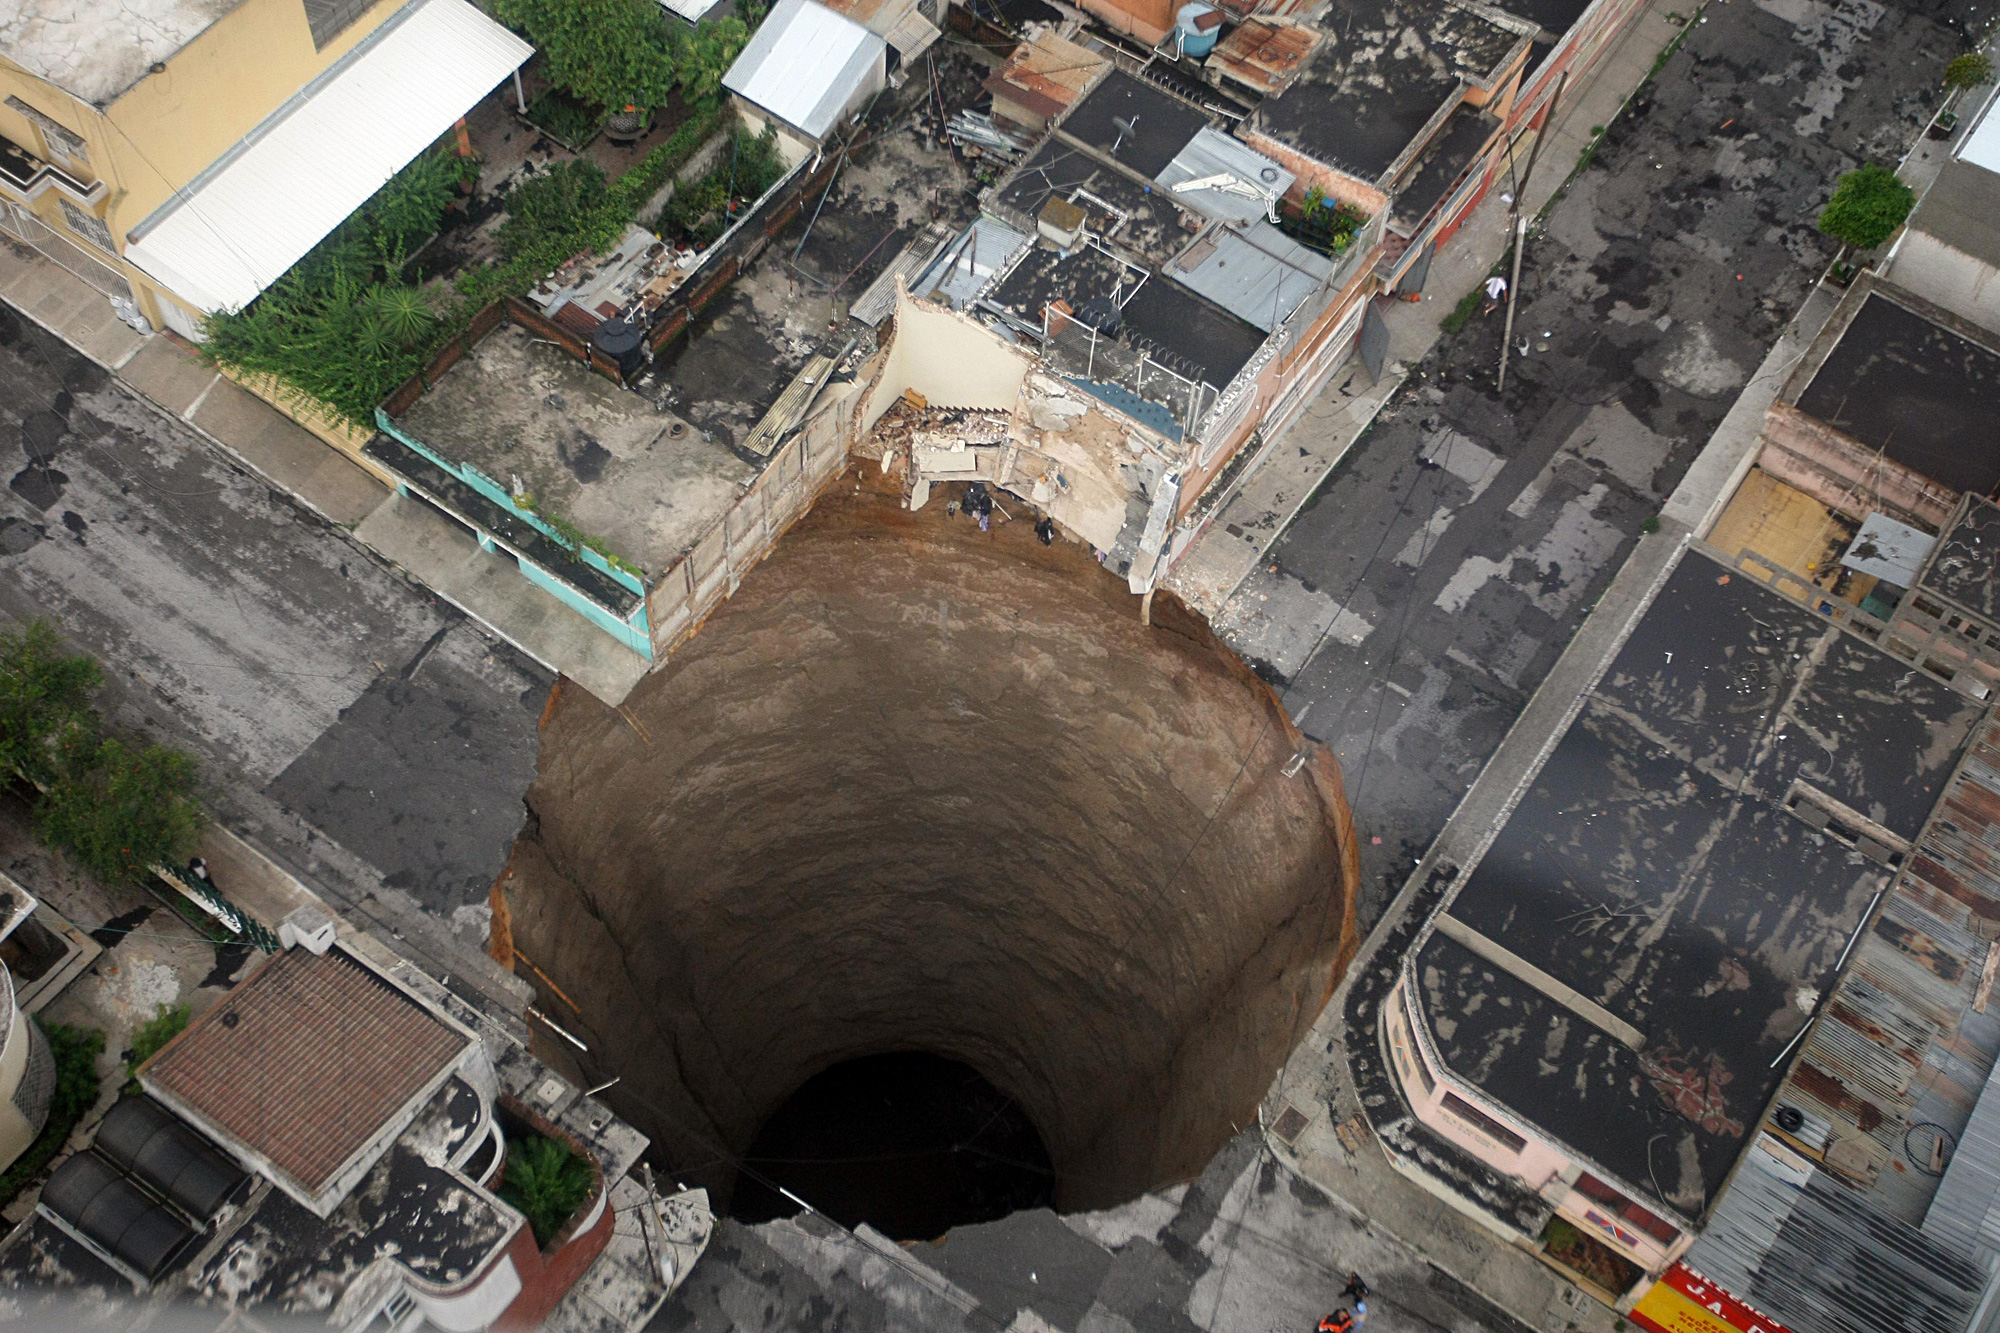 An Open Letter to Sinkholes